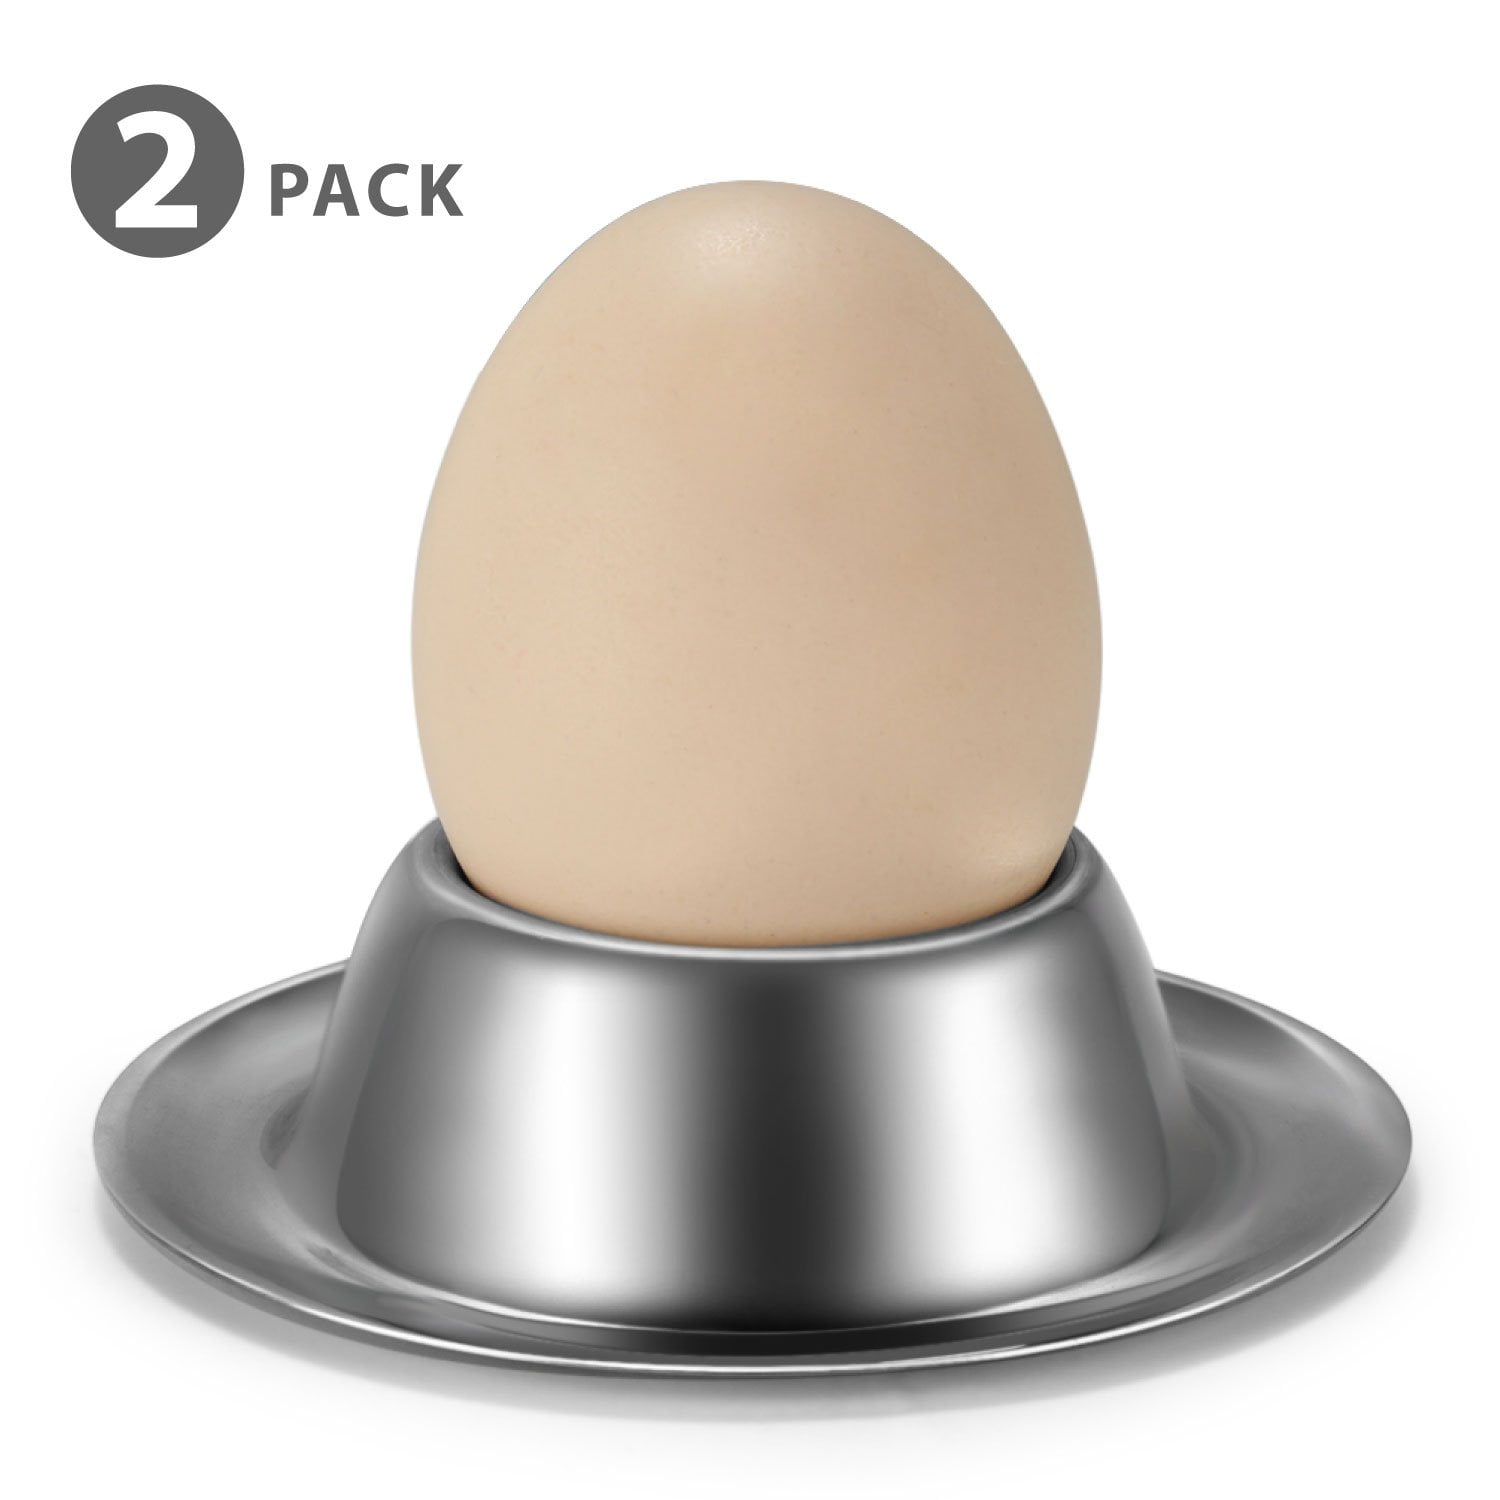 Porcelain Hard Soft Boiled Egg Holder Keeper Container w/Base Flexzion Ceramic Egg Cups Set of 4 Pack White Stackable Serving Dish Plate Stand Serveware for Countertop Display Kitchen 